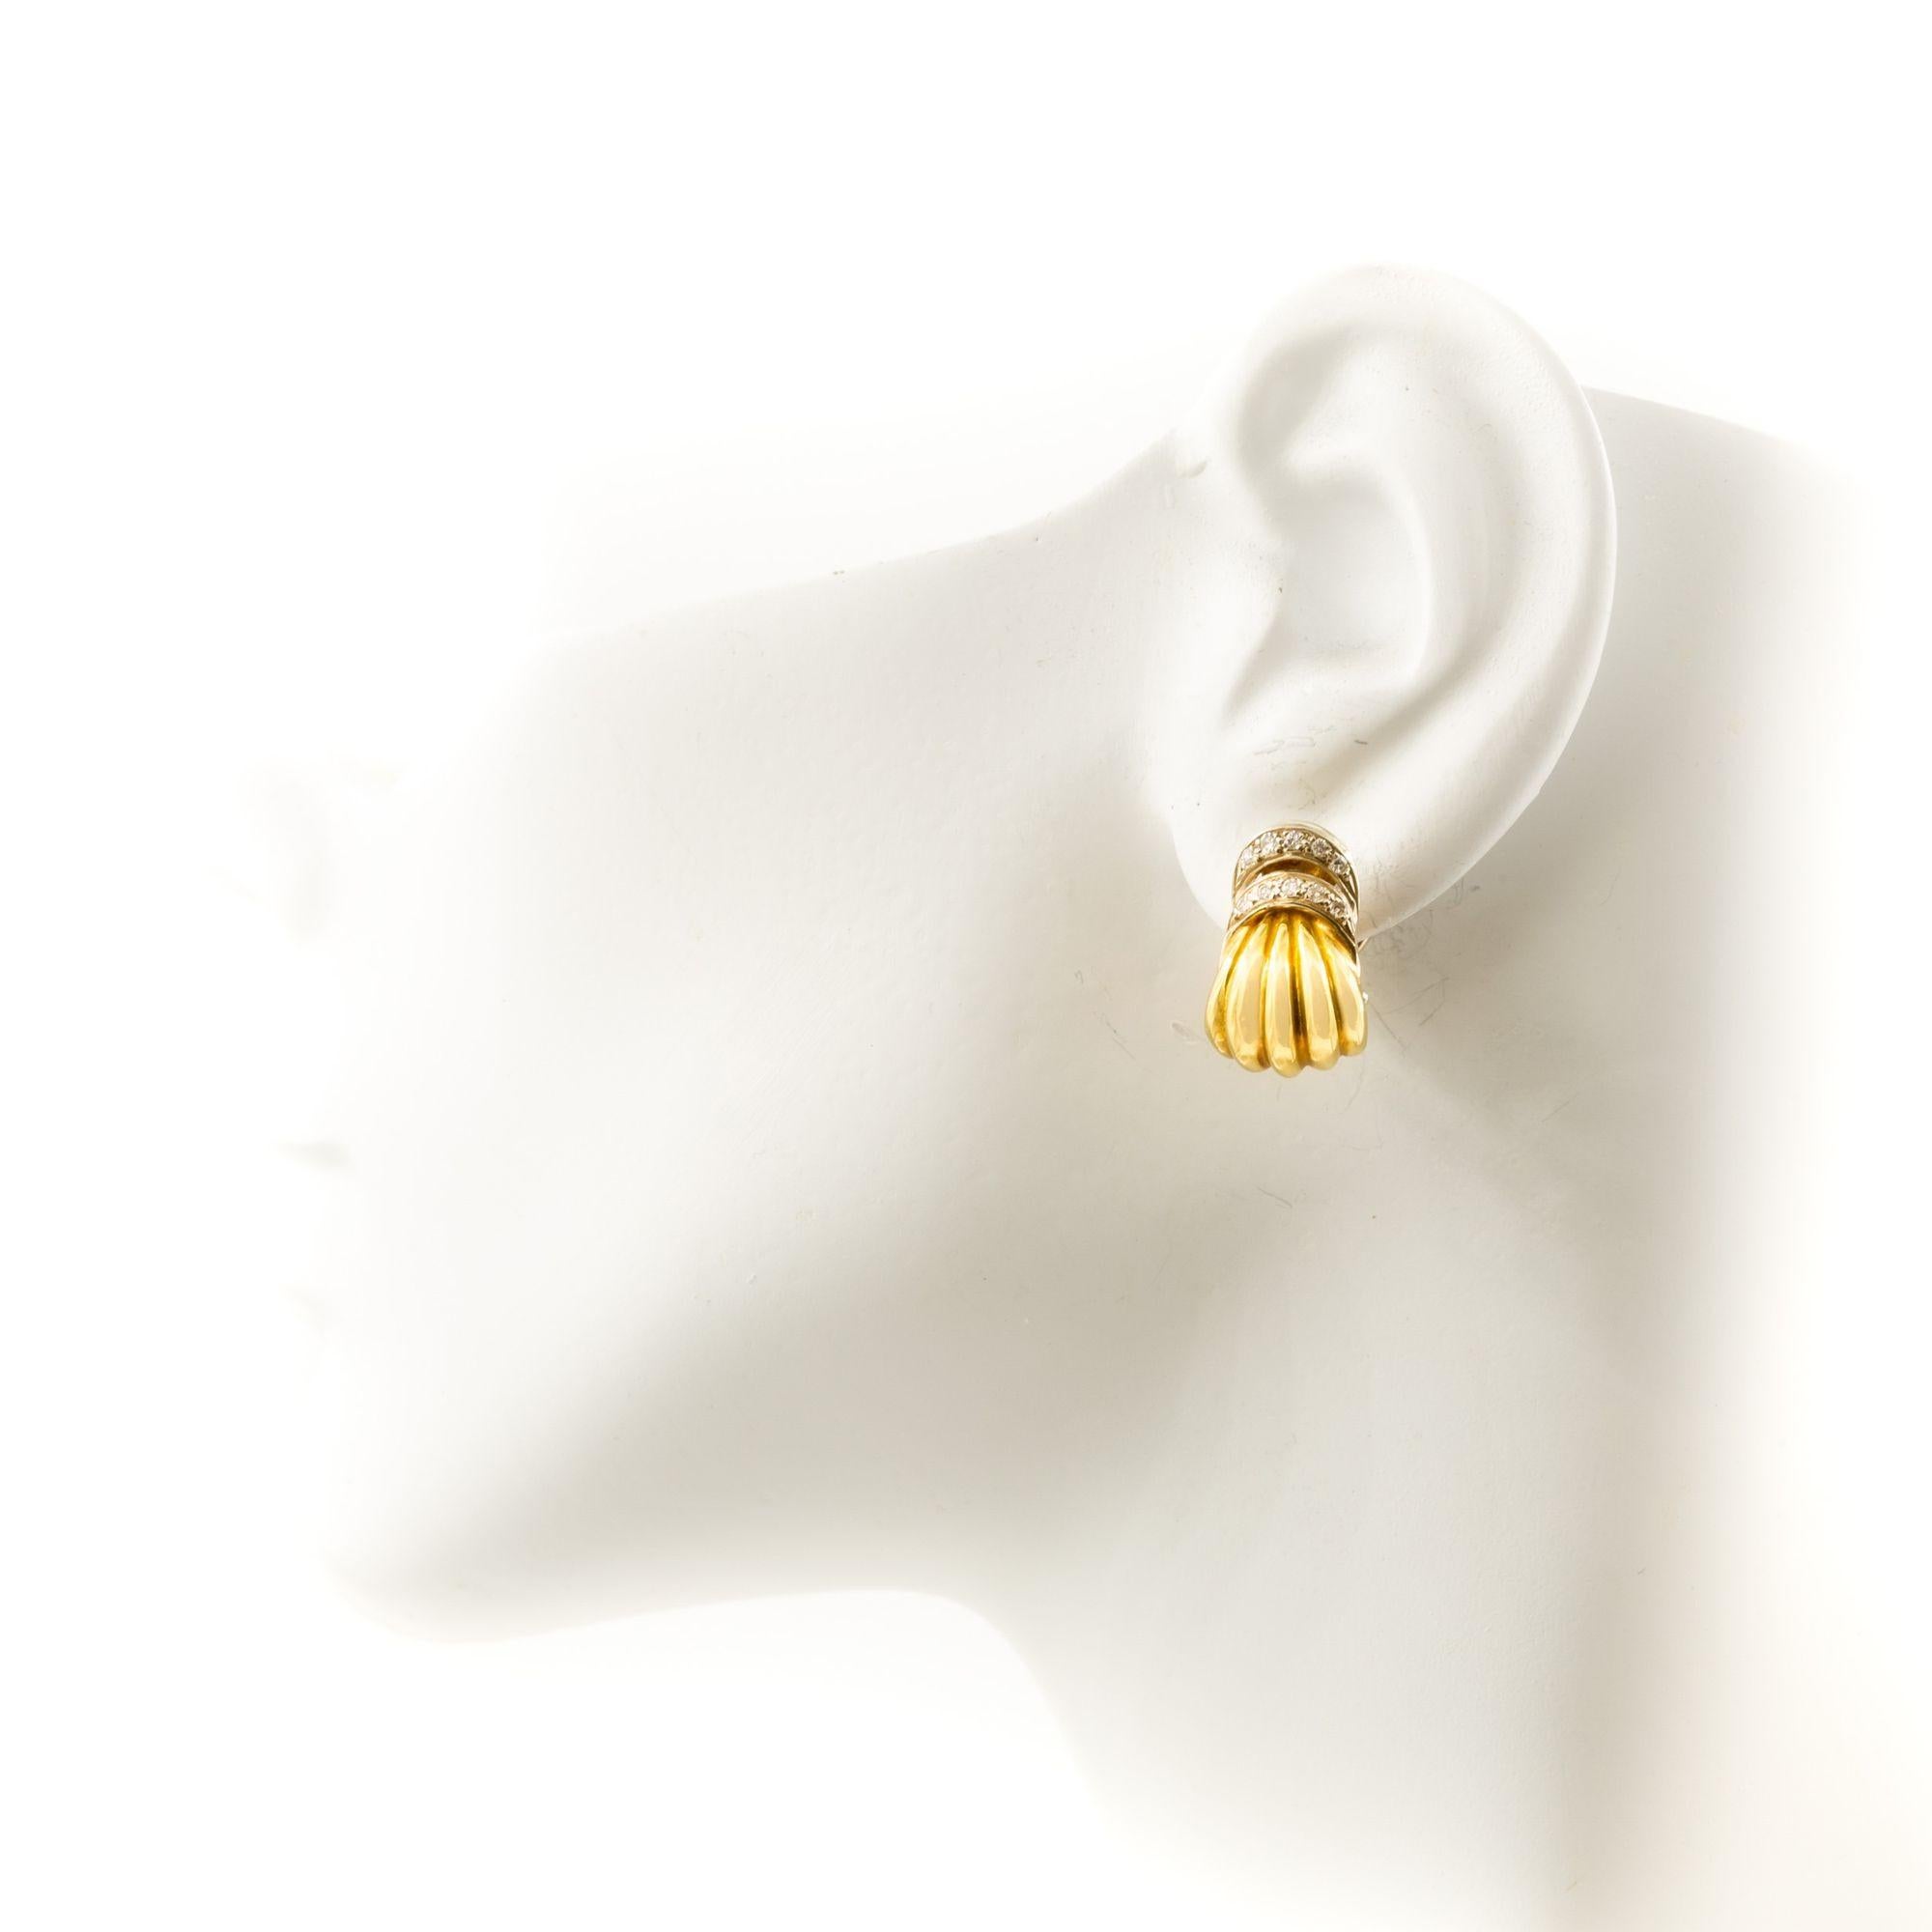 Pair of 18K Yellow Gold & Gemstone Swirl Earrings
Item # C104609

A beautiful pair of 18K yellow gold earrings, featuring a swirl design that gives them a dynamic and fluid appearance. The swirls are accented with a band of gemstones, creating a